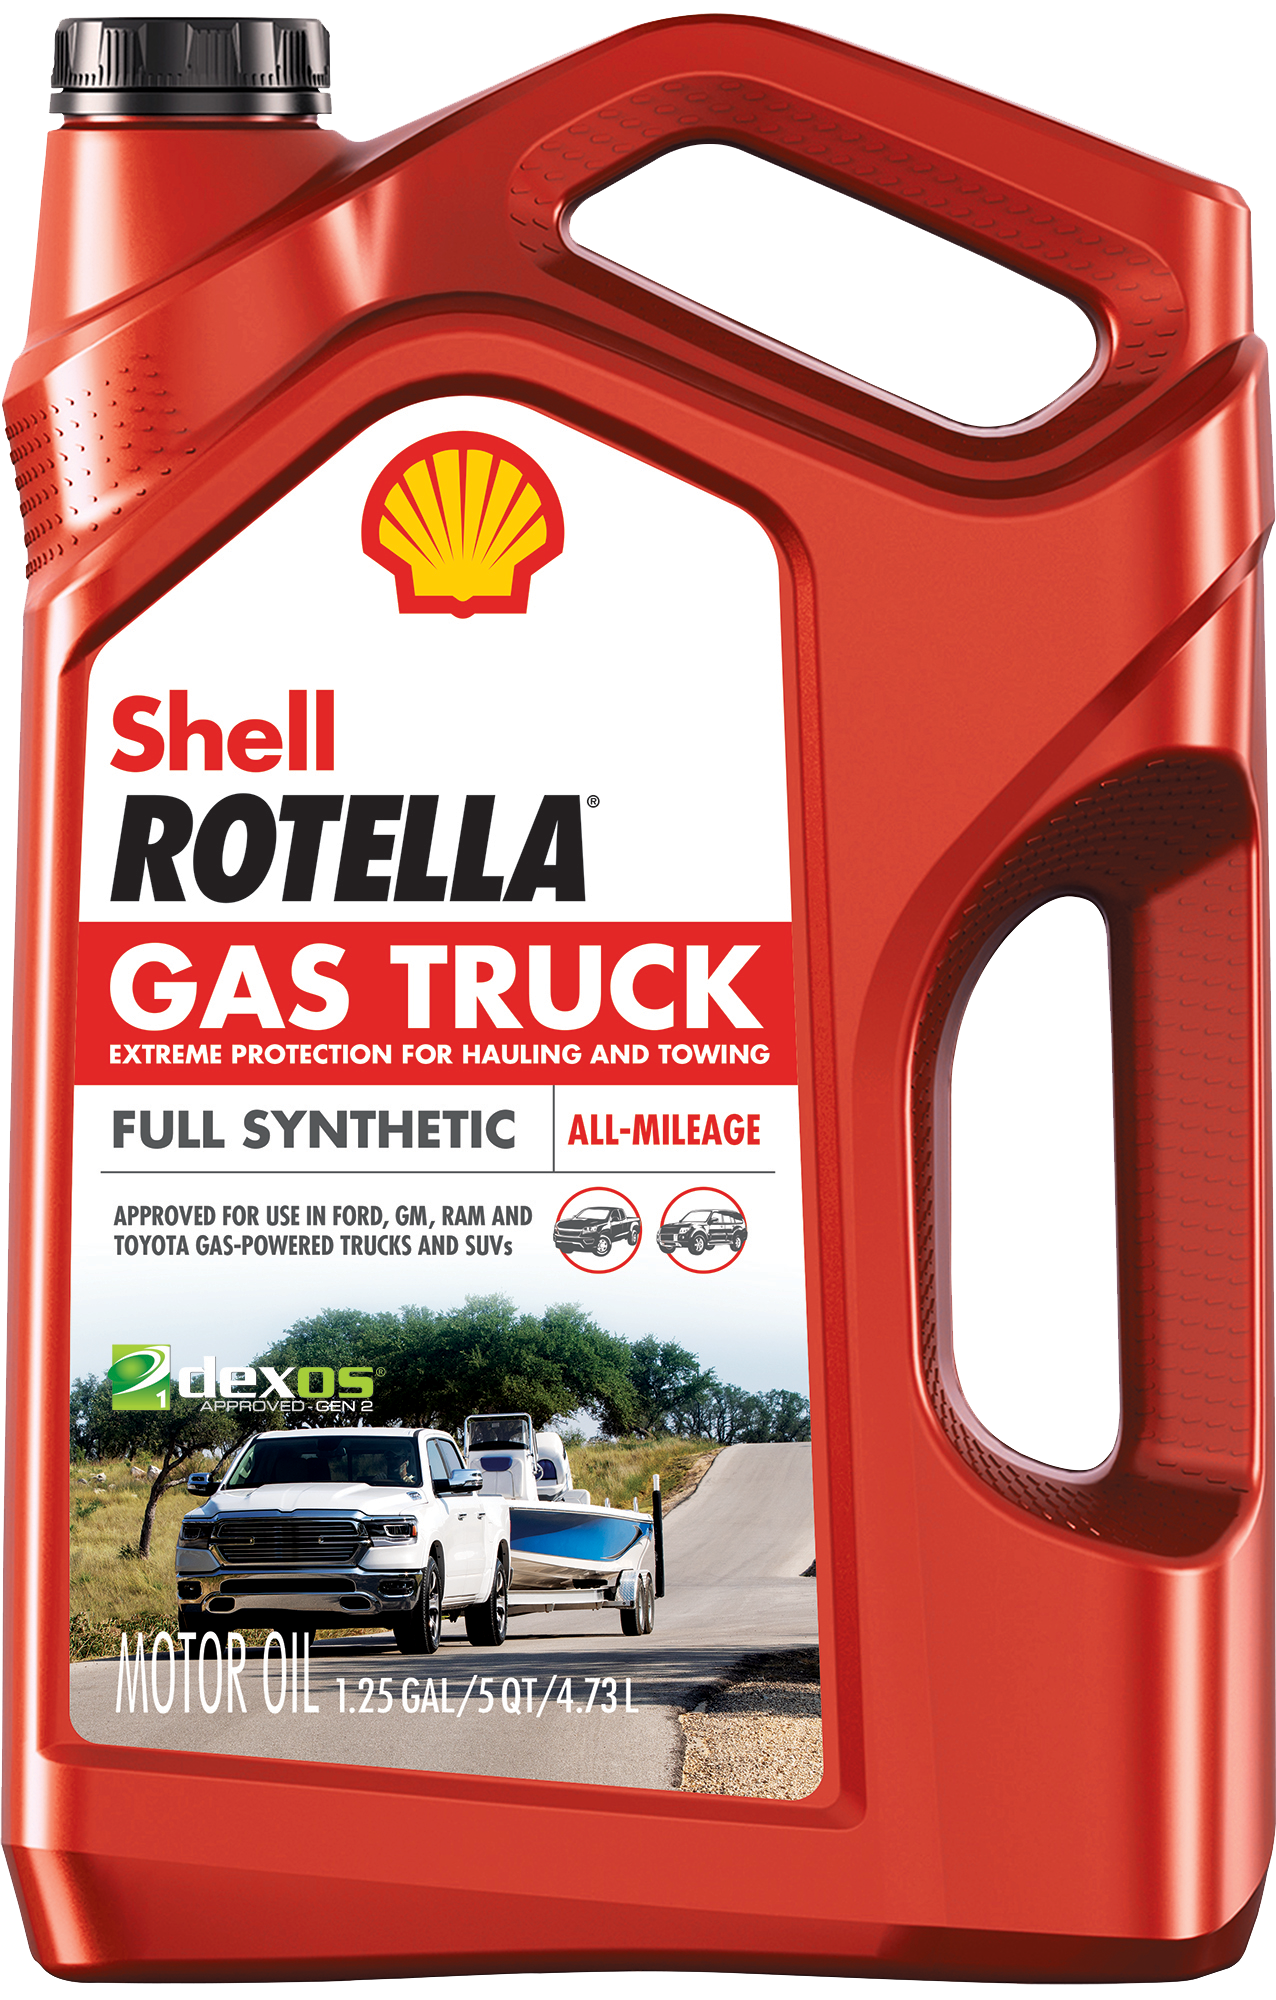 new-full-synthetic-gas-truck-rotella-taylor-enterprises-inc